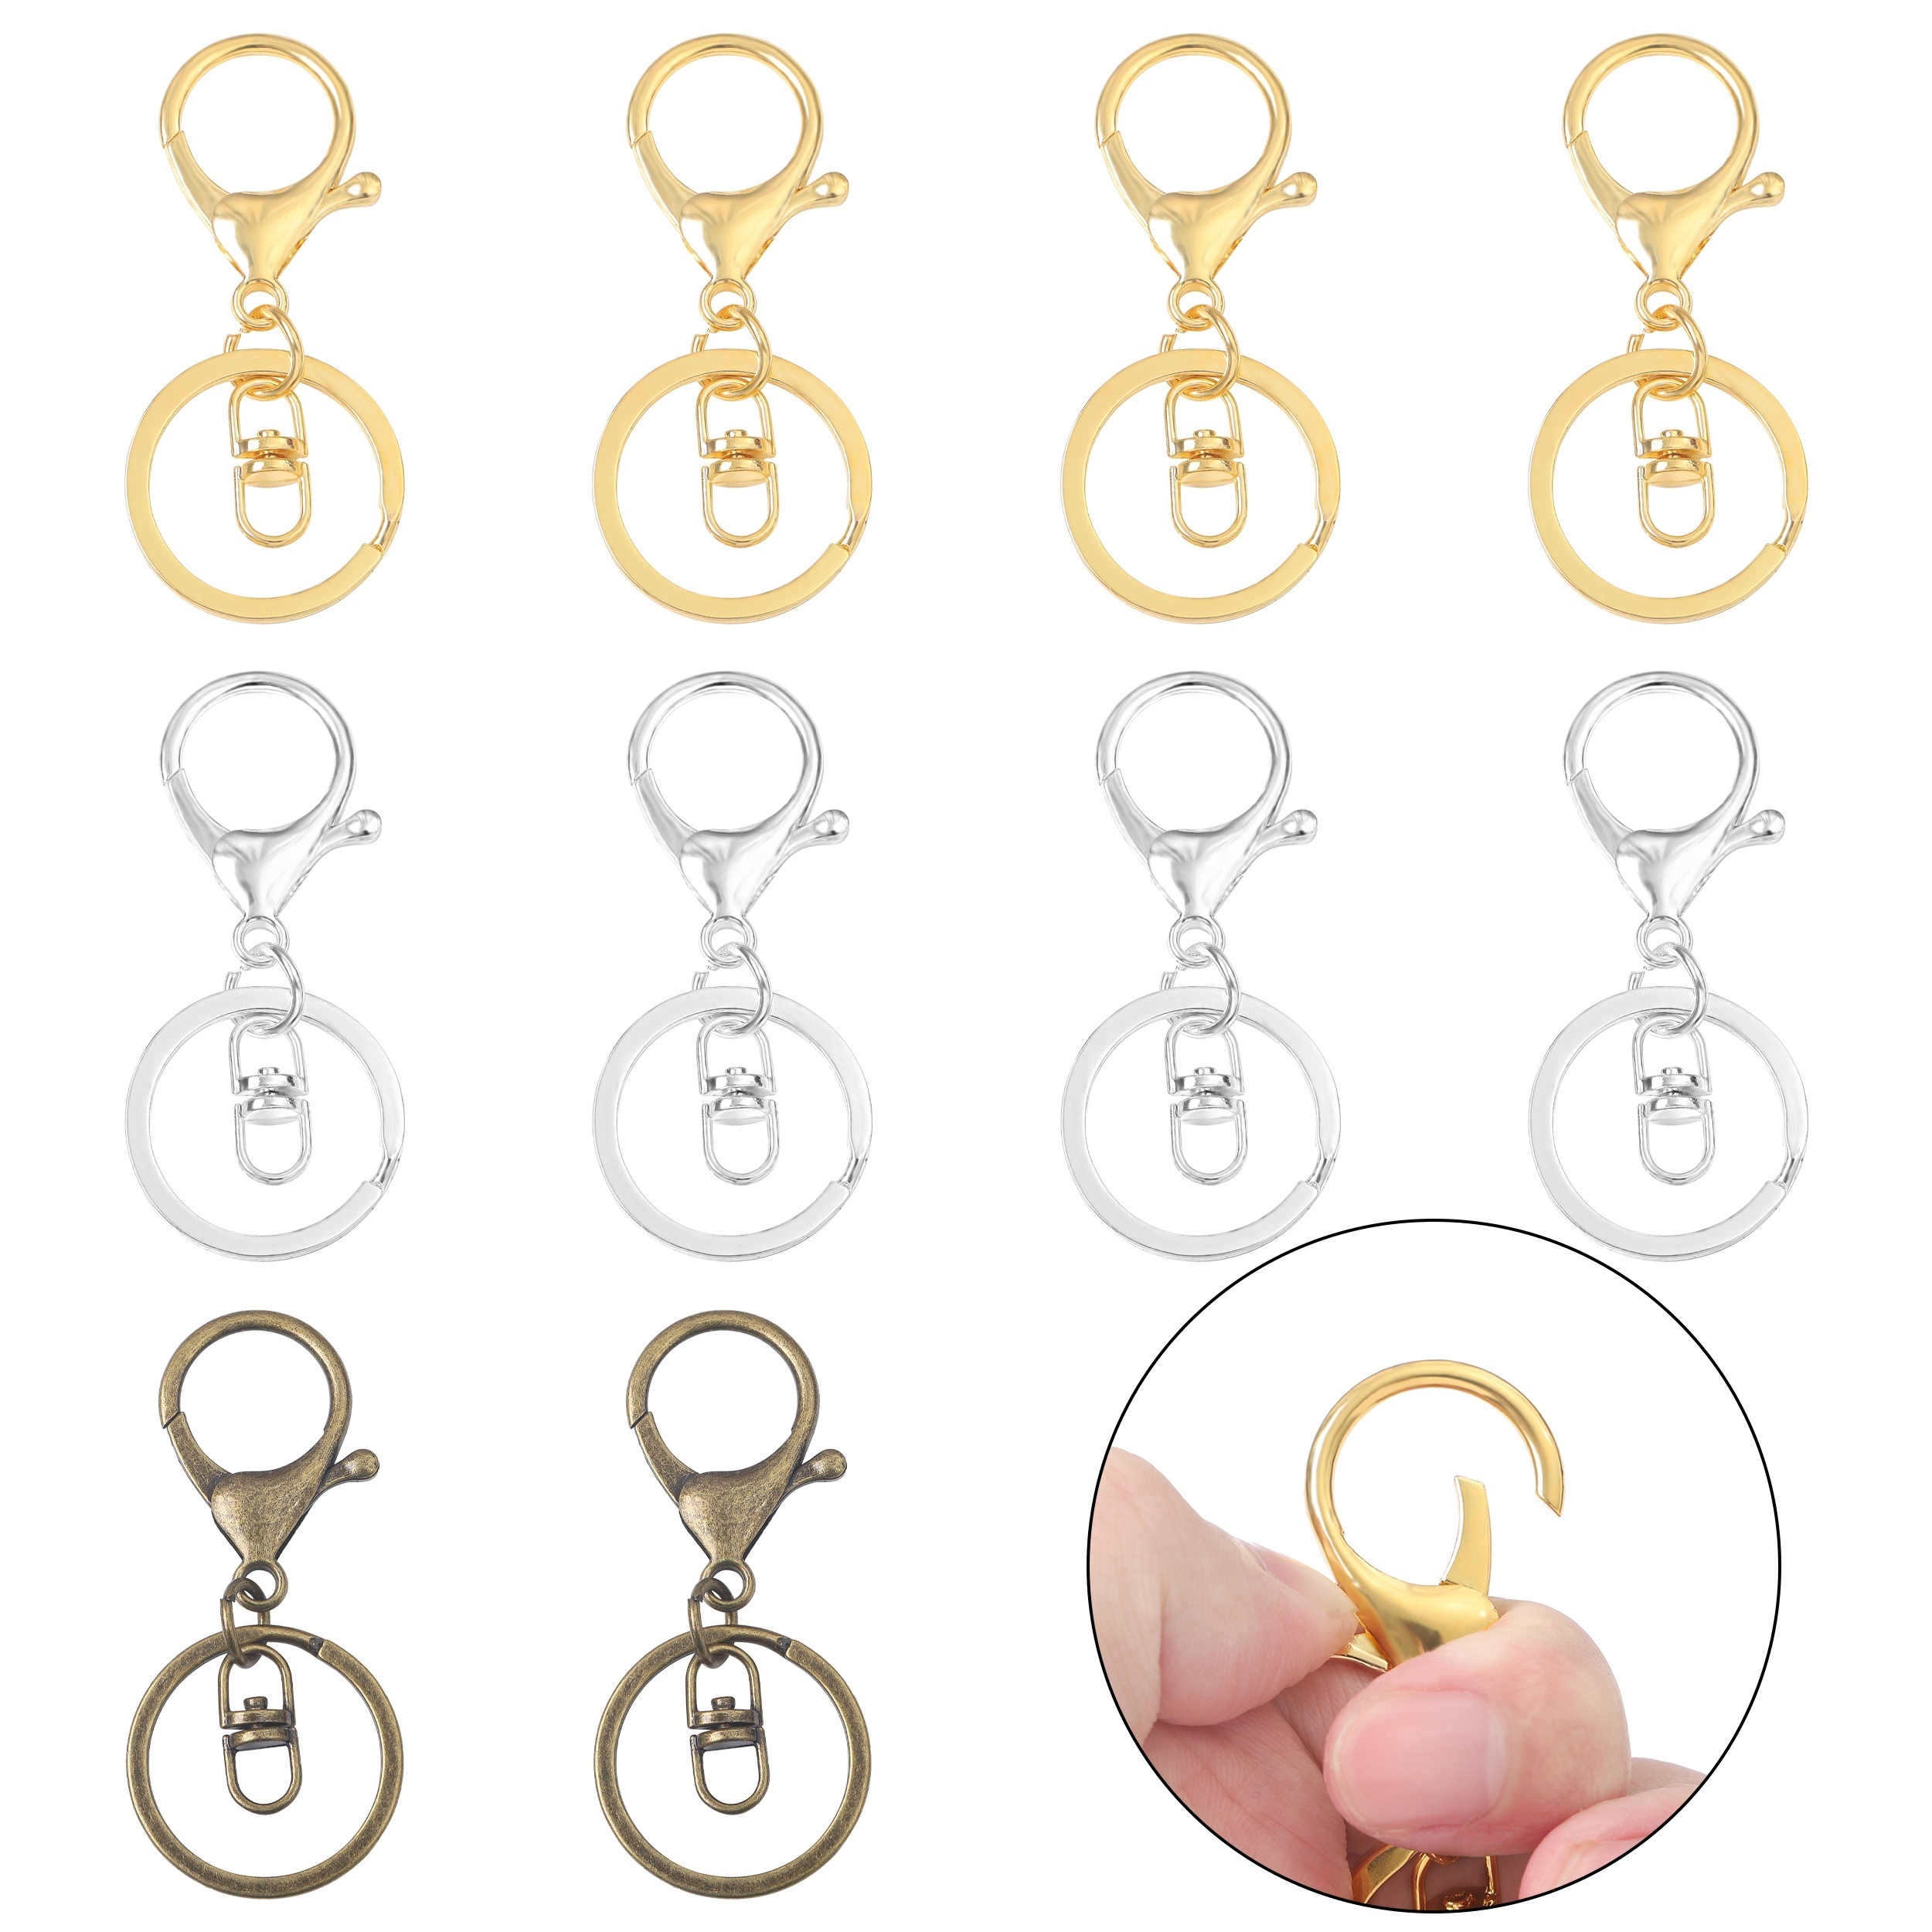 Metal Ring Keychain Multicolor Keyring Buckle Jewelry Making Supplies 20pcs  Set